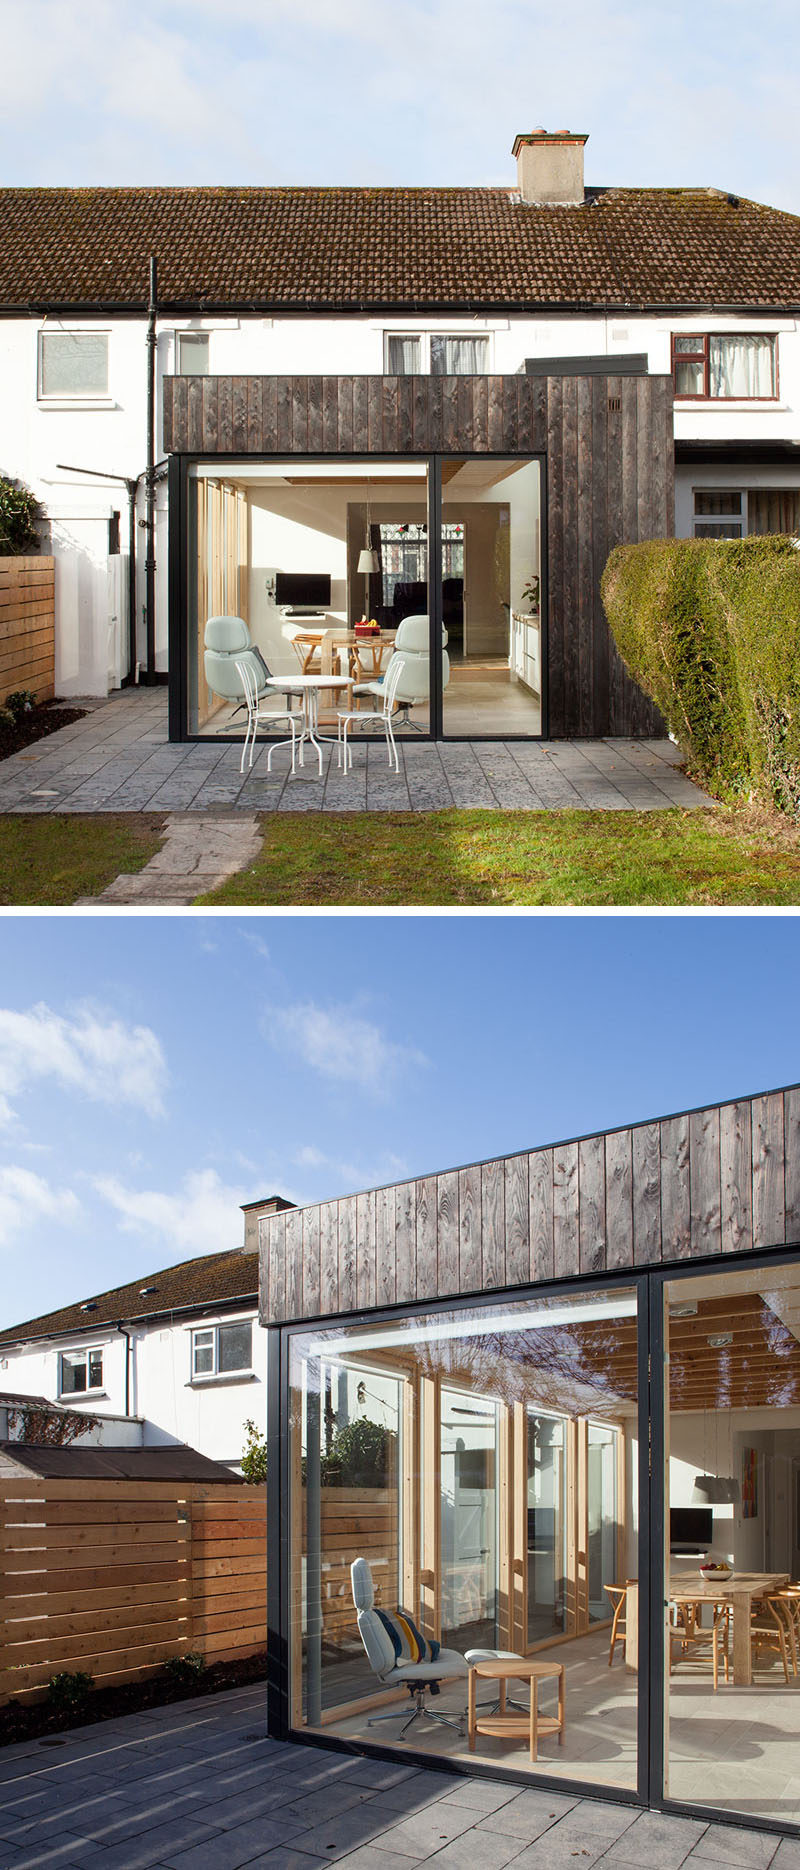 This modern house extension is covered in charred timber while the interior is a bright and airy space with a kitchen, a dining area and plenty of windows.